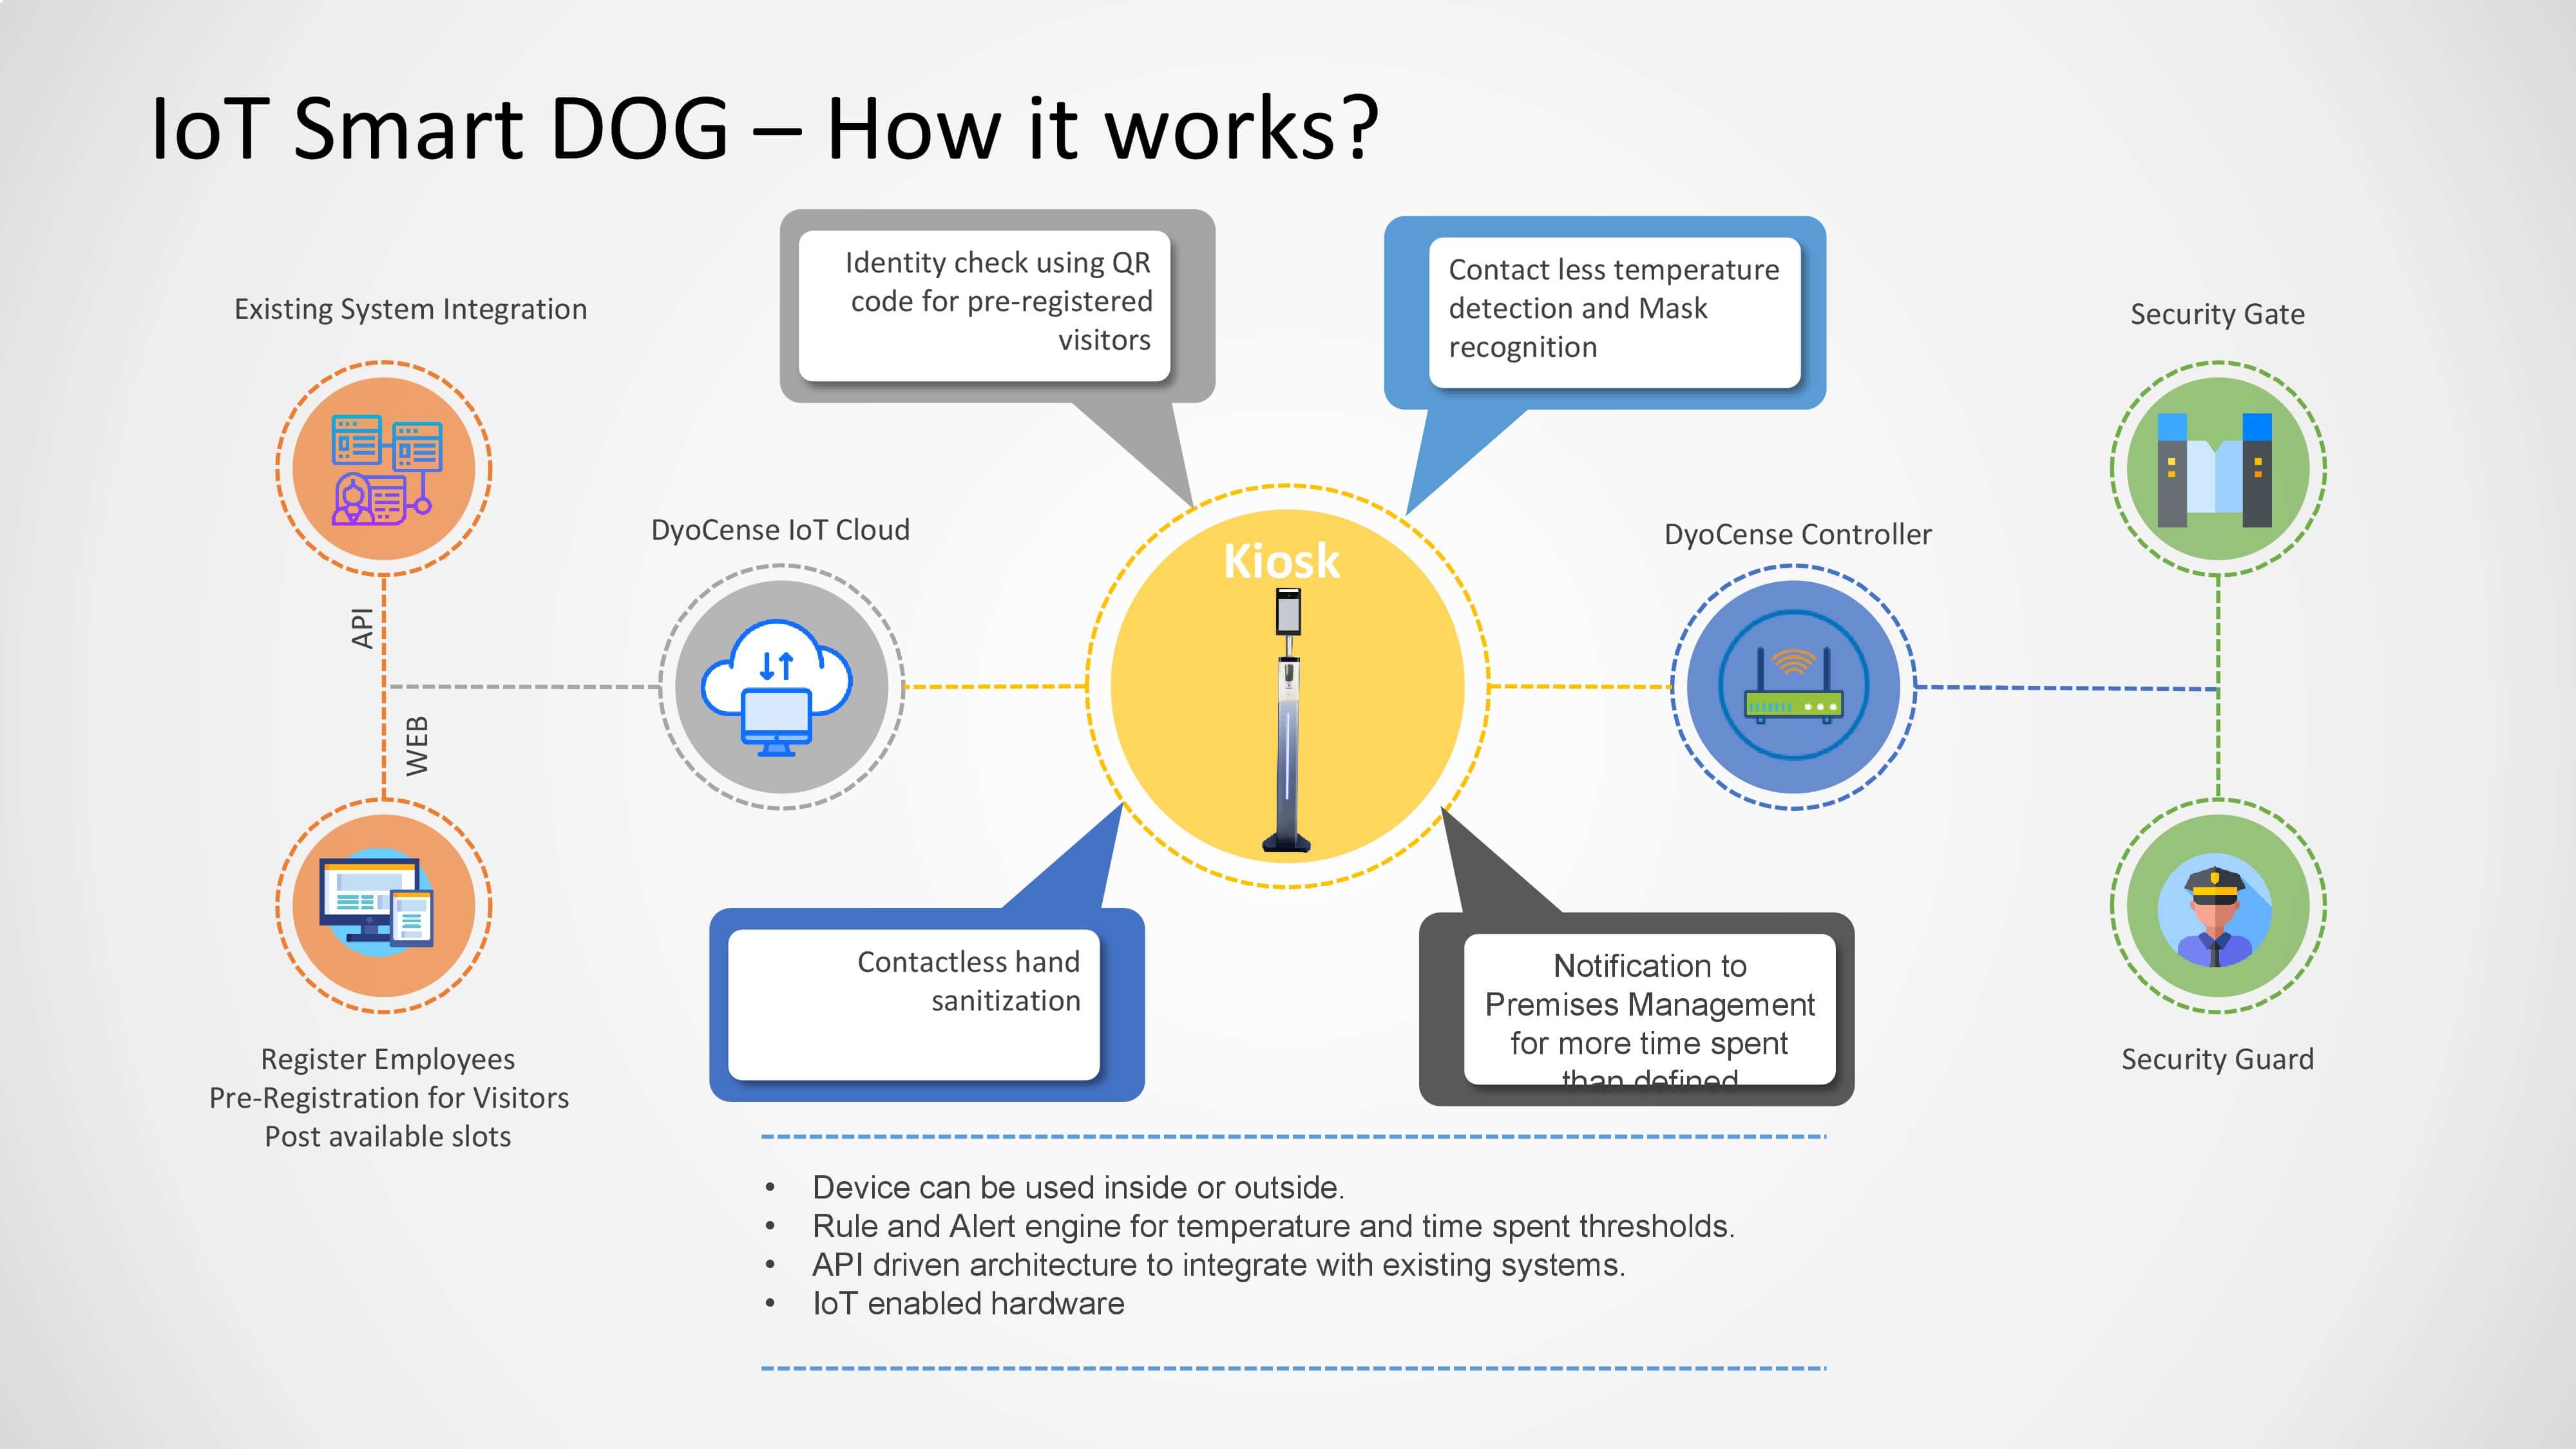 DyoCense IoT smart dog working structure image